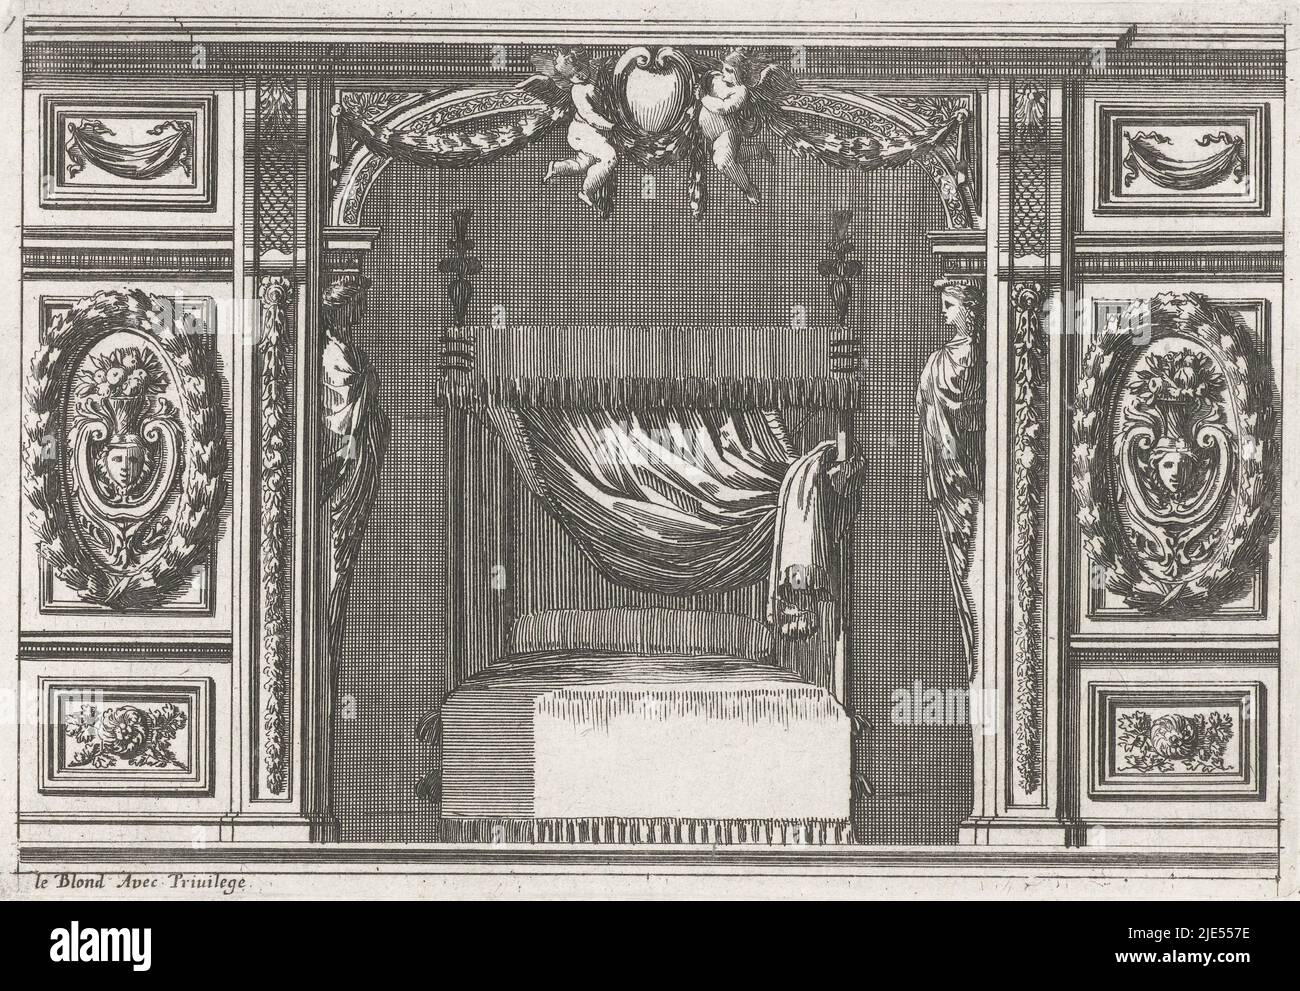 In the middle of the wooden panelling a mask can be seen, surrounded by a garland of leaves. From series of 6 leaves, Alcove with wooden panelling on both sides Alkoven (series title), print maker: Jean Lepautre, Jean Lepautre, publisher: Jean Leblond (I), (mentioned on object), print maker: France, (possibly), France, (possibly), publisher: Paris, c. 1650, paper, etching, h 137 mm × w 199 mm Stock Photo